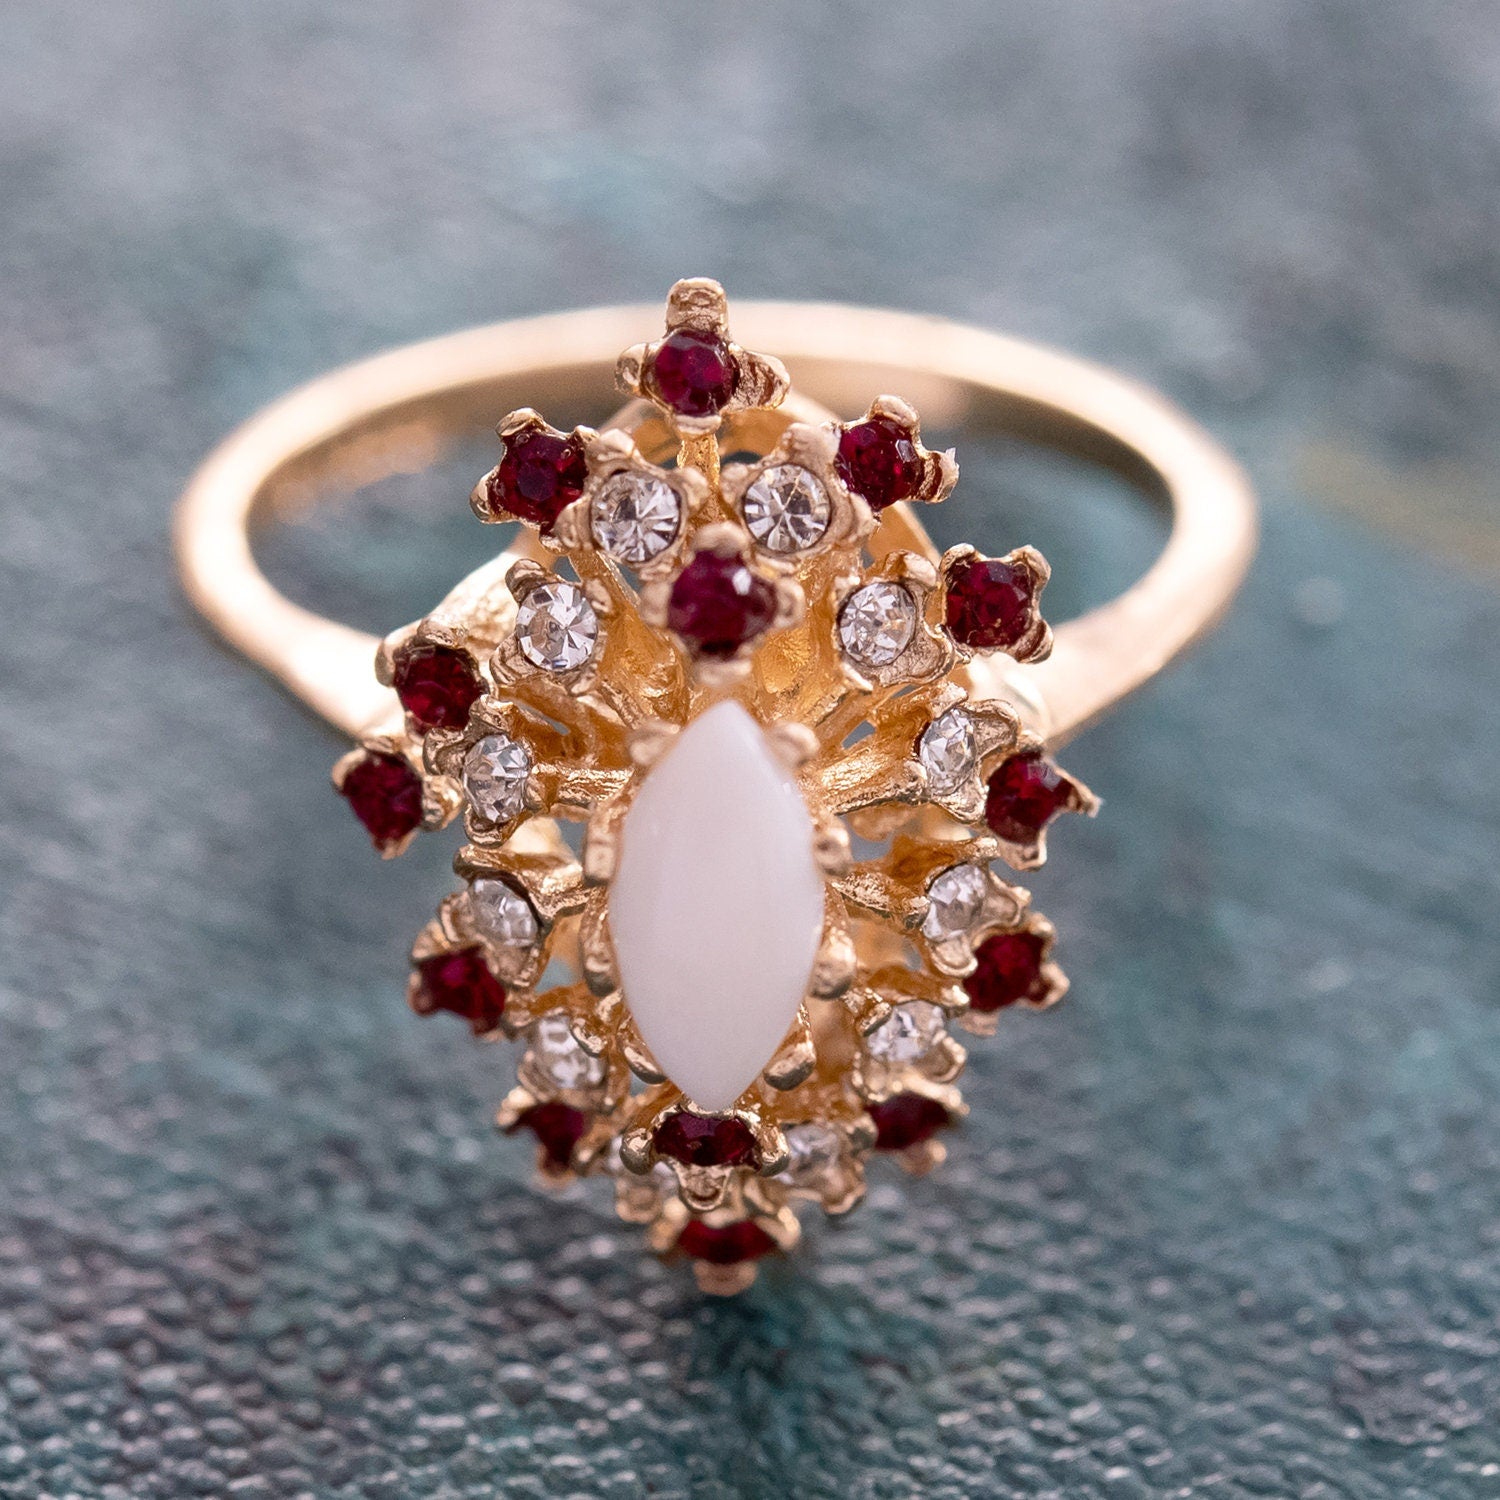 Vintage Ring Genuine Opal Surrounded by Clear and Ruby Swarovski Crystal Cocktail Ring 18k Gold Antique R221 - Limited Stock - Never Worn